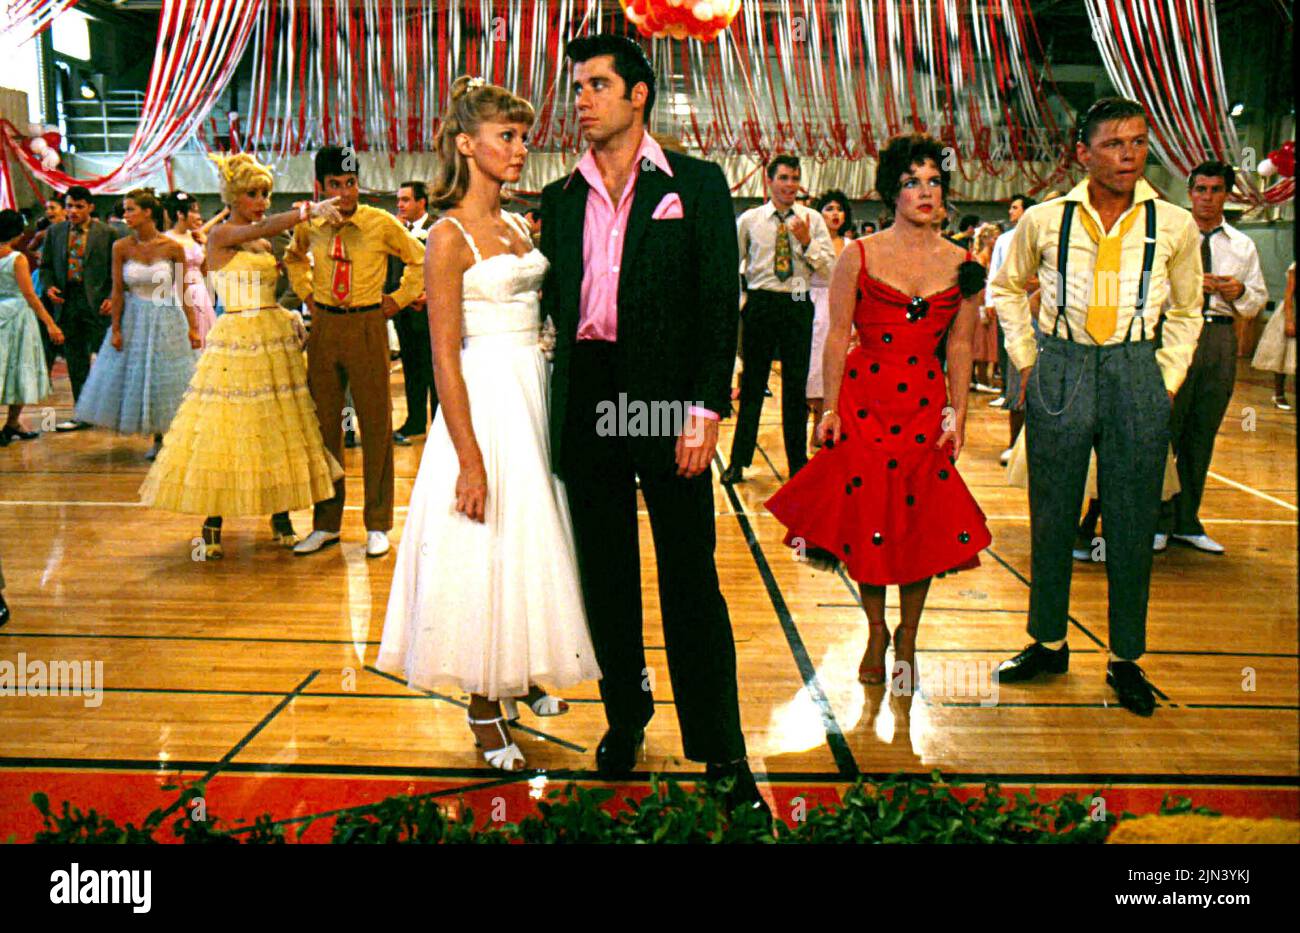 1977 - Hollywood, California, U.S. - Actors OLIVIA NEWTON JOHN with JOHN TRAVOLTA during a dance scene while filming of the movie 'GREASE' in 1977. (Credit Image: © Phil Roach/Globe Photos via ZUMA Wire) Stock Photo